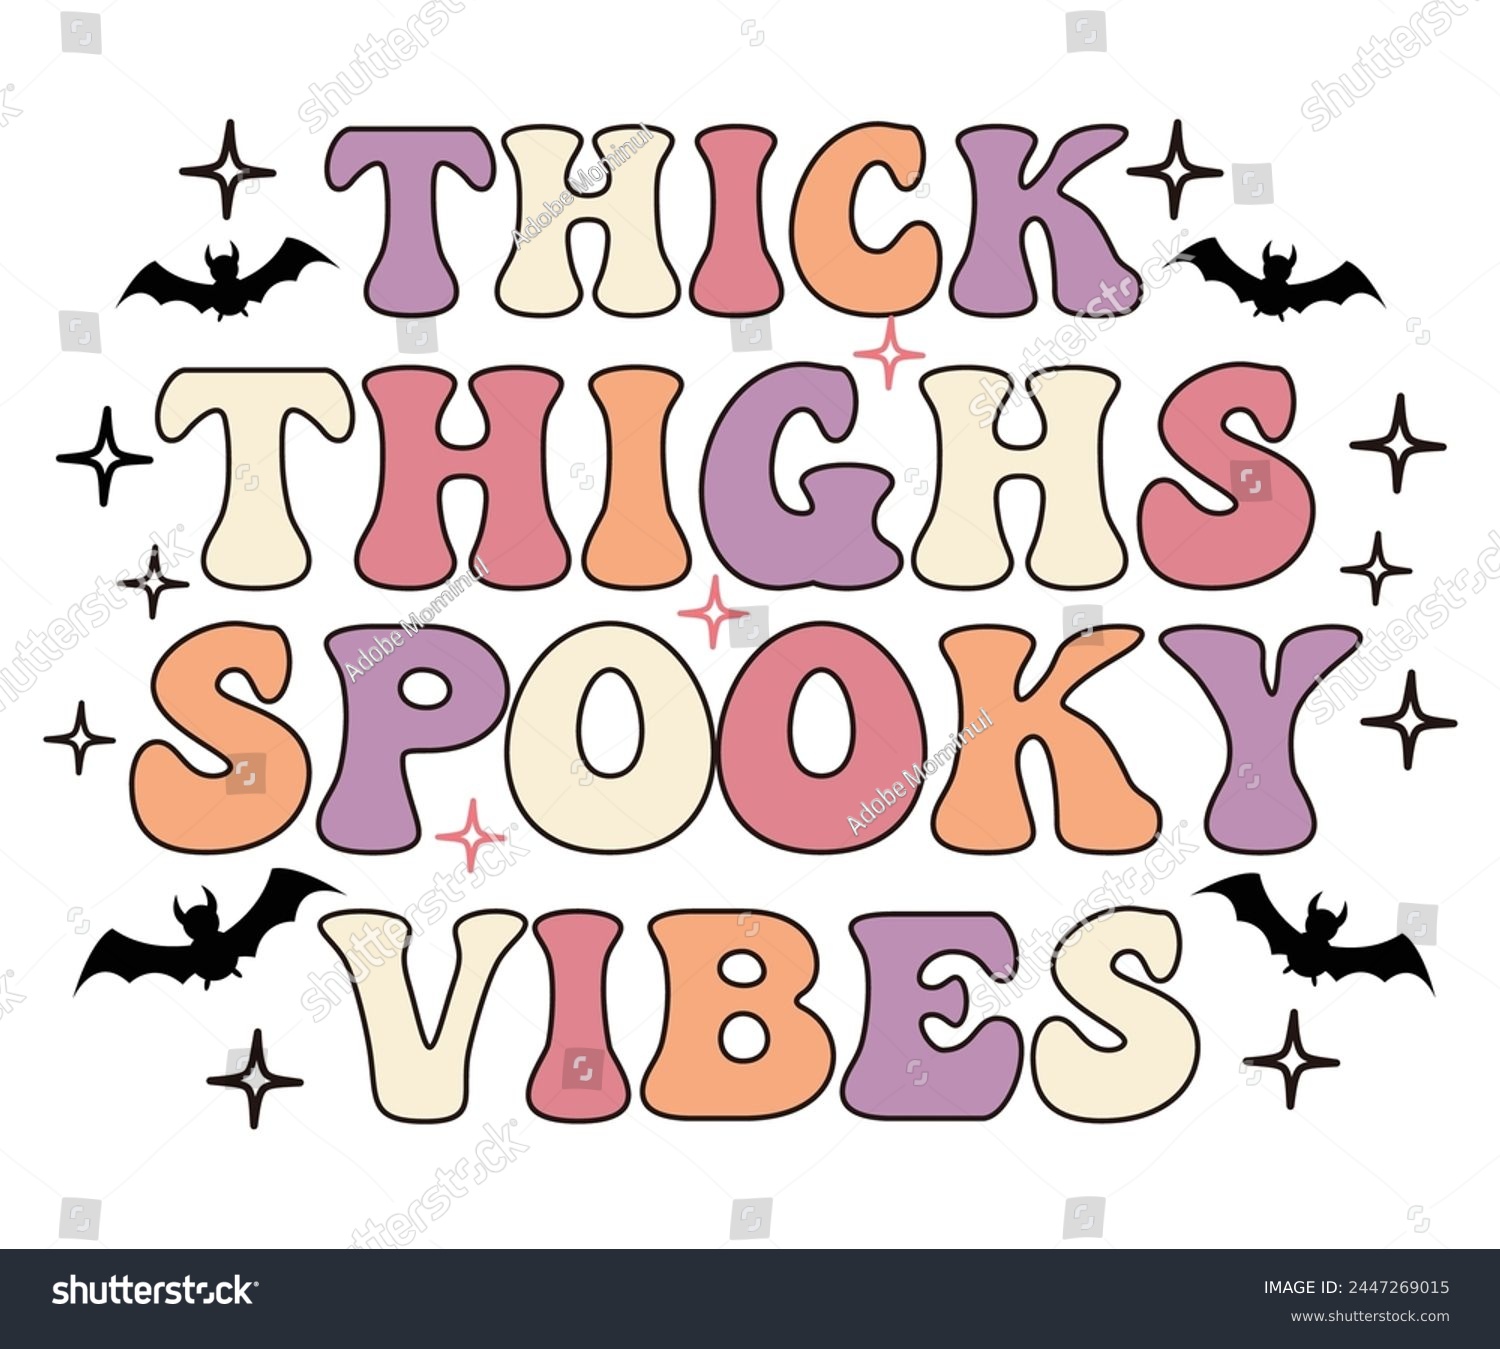 SVG of Thick Thighs And Spooky Vibes,Halloween Svg,Typography,Halloween Quotes,Witches Svg,Halloween Party,Halloween Costume,Halloween Gift,Funny Halloween,Spooky Svg,Funny T shirt,Ghost Svg,Cut file svg